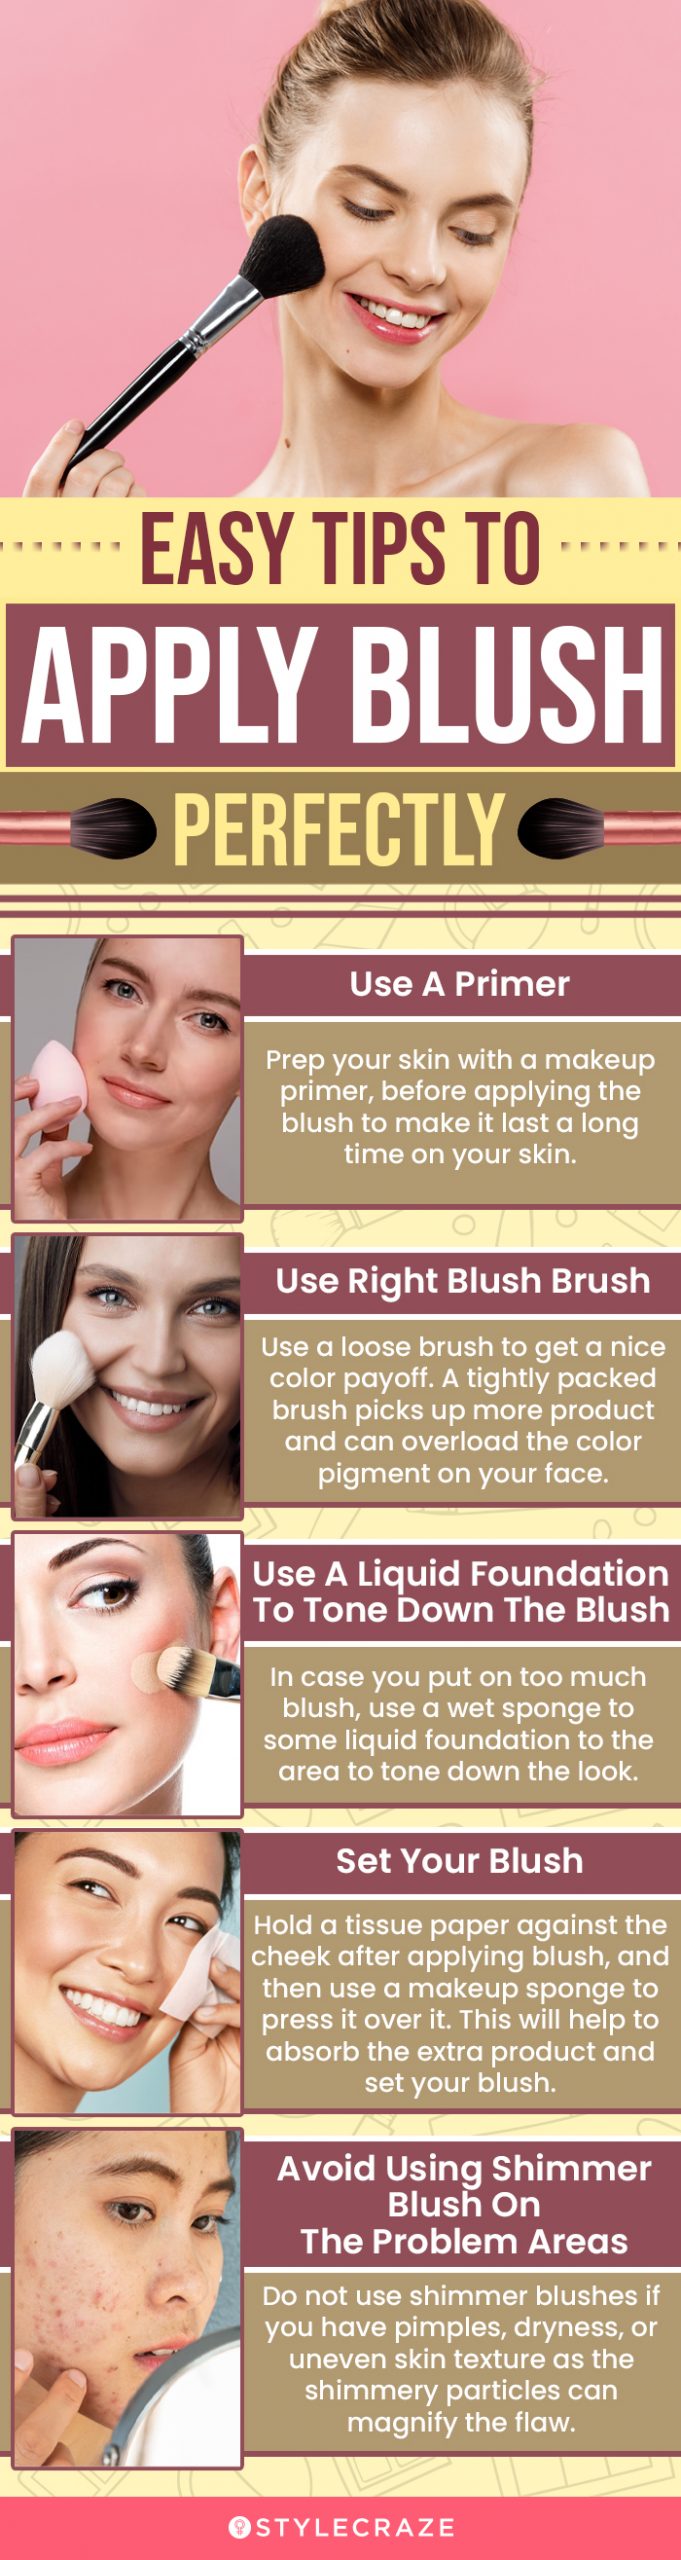 Easy Tips To Apply Blush Perfectly (infographic)